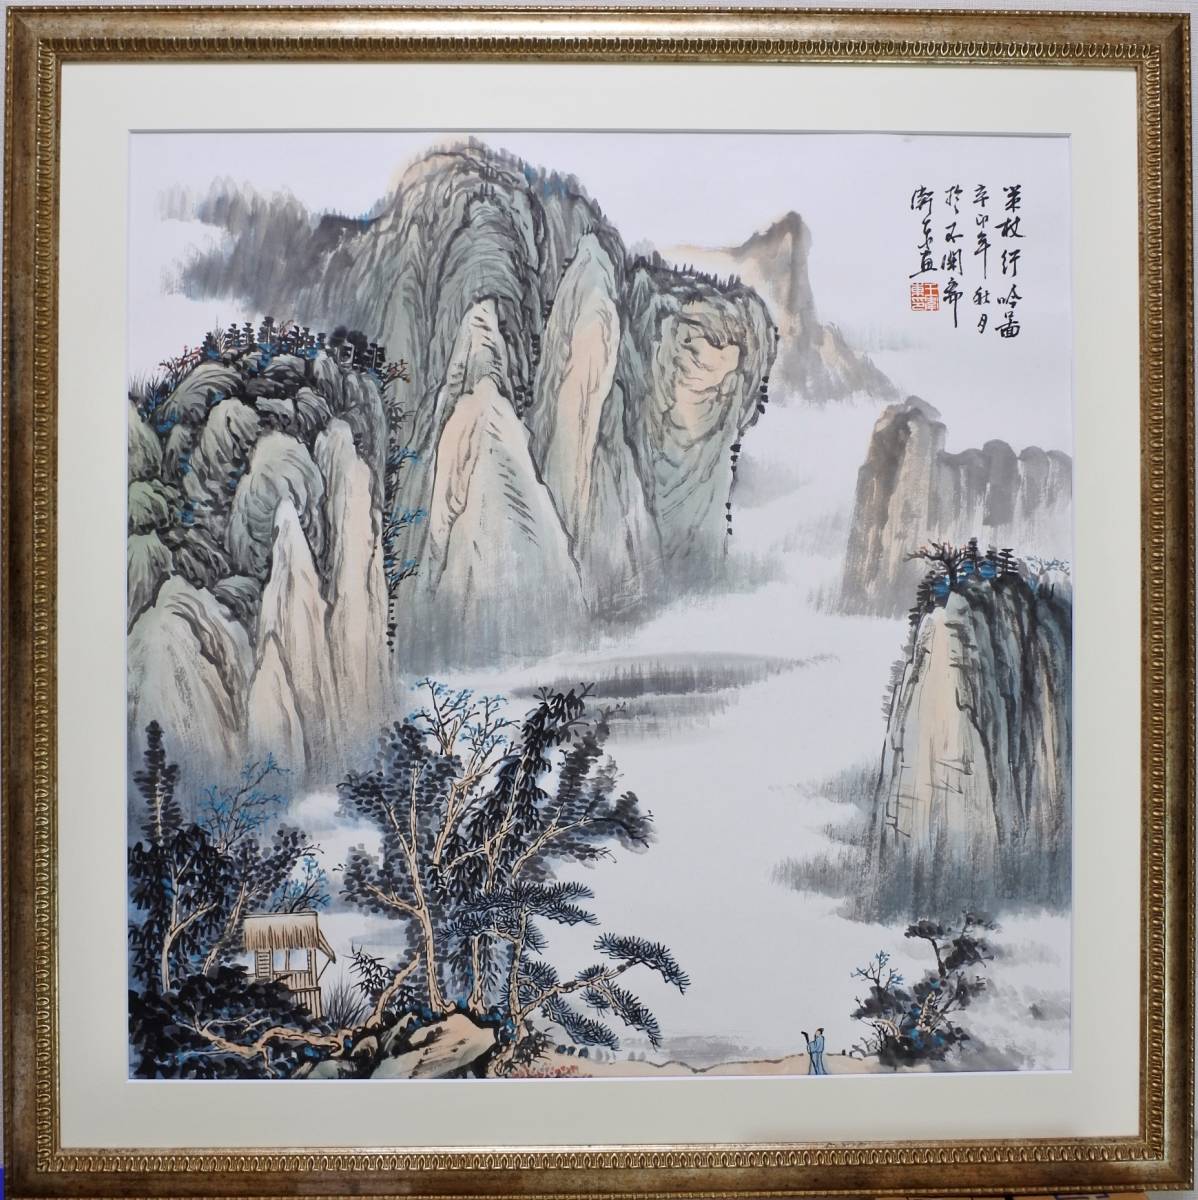 Chinese national painting collection ☆ Chinese first-class painter Wang Weidong's work Landscape is a genuine hand-painted work. Painting only. Stored item. Can be shipped together. Shipping fee is 1600 yen., Artwork, Painting, Ink painting